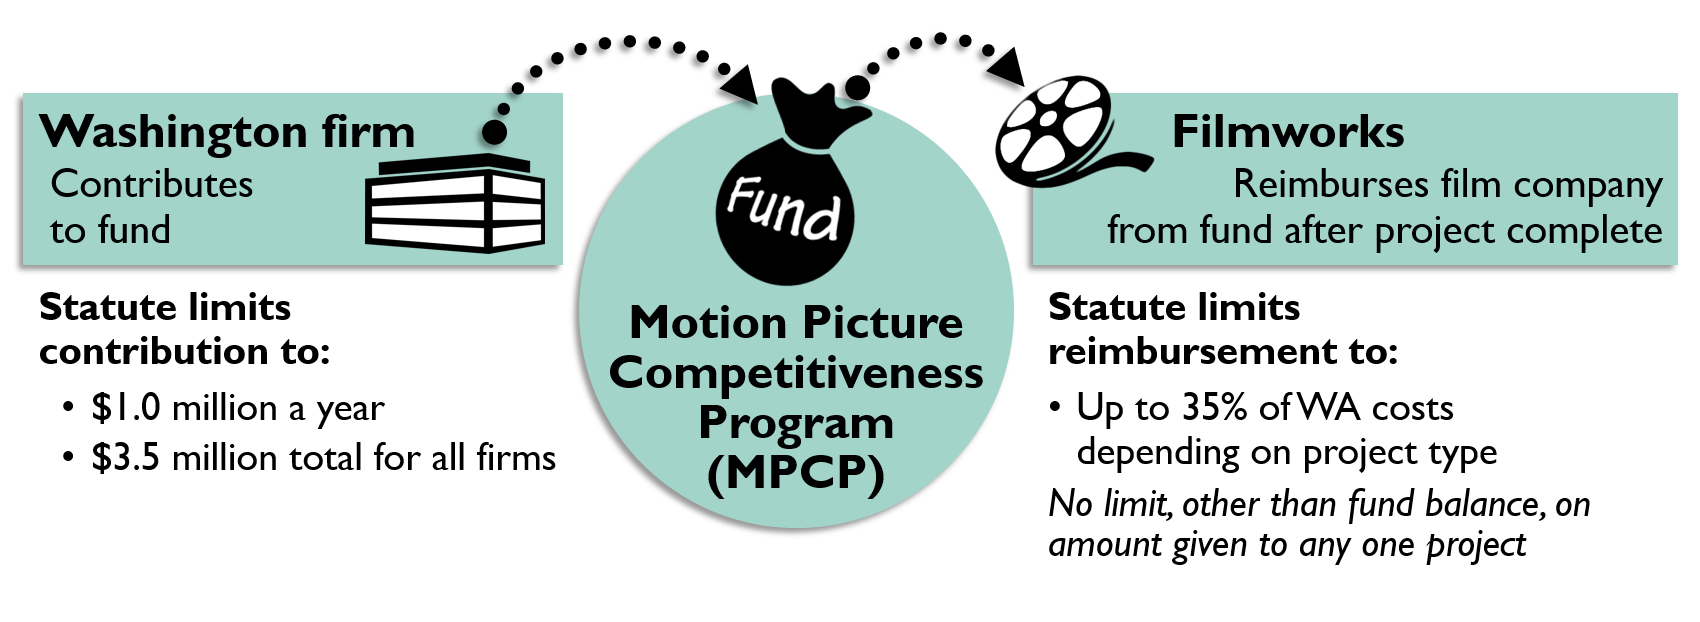 Descriptive graphic: Washington firm contributes to Motion Picture Competitiveness Program fund, Filmworks reimburses film company from fund after project is complete. Washington firm contributions limited by statute to $1M a year, $3.5M annual total for all firms. Filmworks reimbursements limited by statute to 35% of WA costs, depending on project type. No limit, other than fund balance, on amount given to any one project.